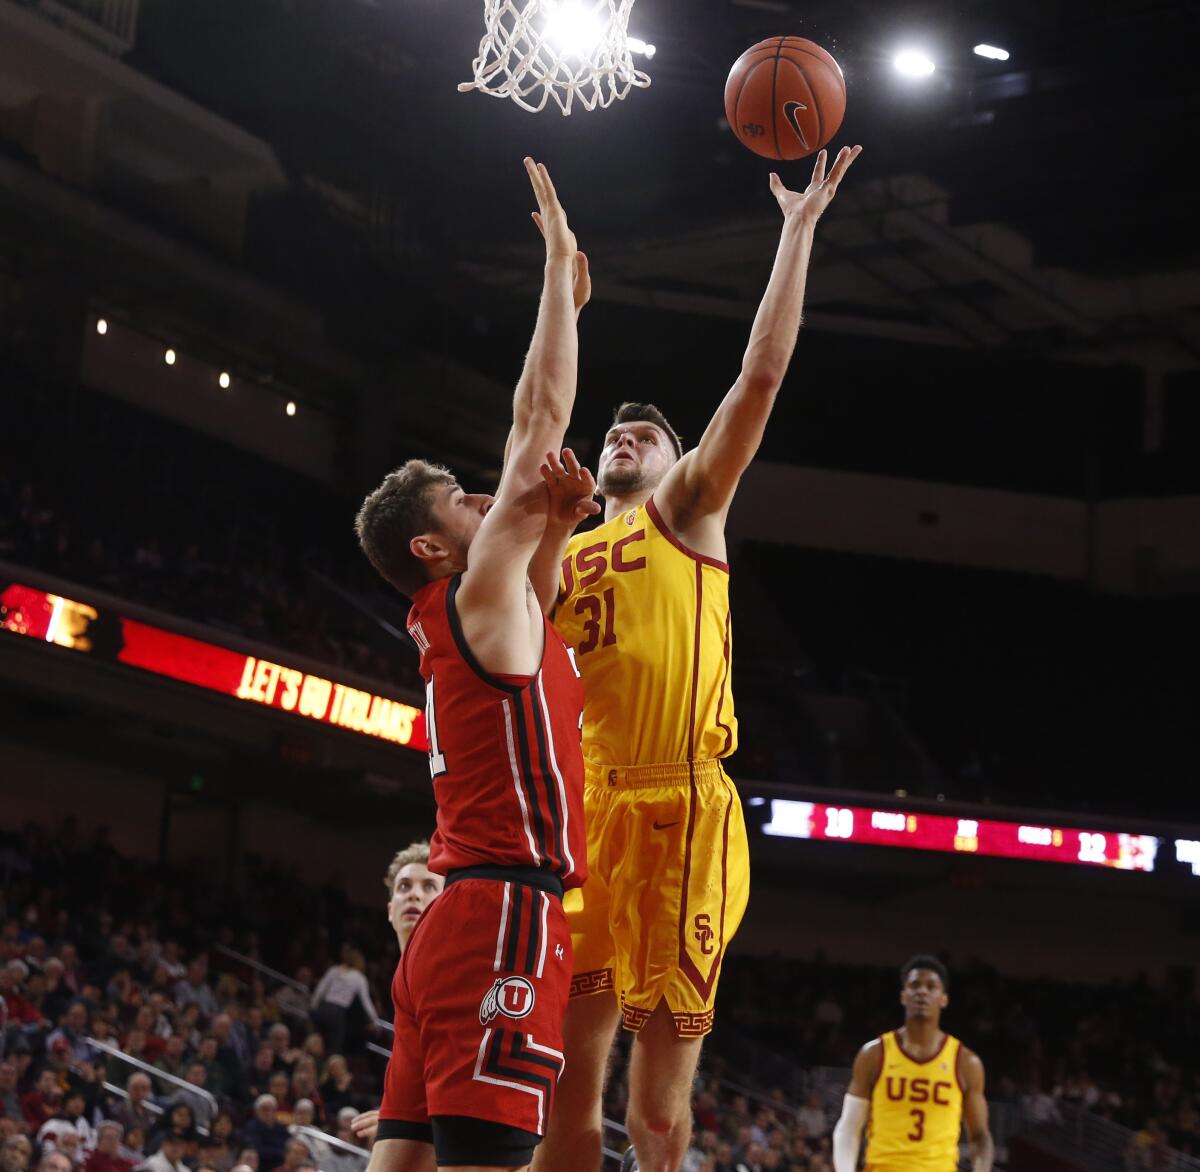 USC forward Nick Rakocevic (31) scores a basket guarded by Utah Utes forward Riley Battin (21) in the first half at the Galen Center on Thursday.